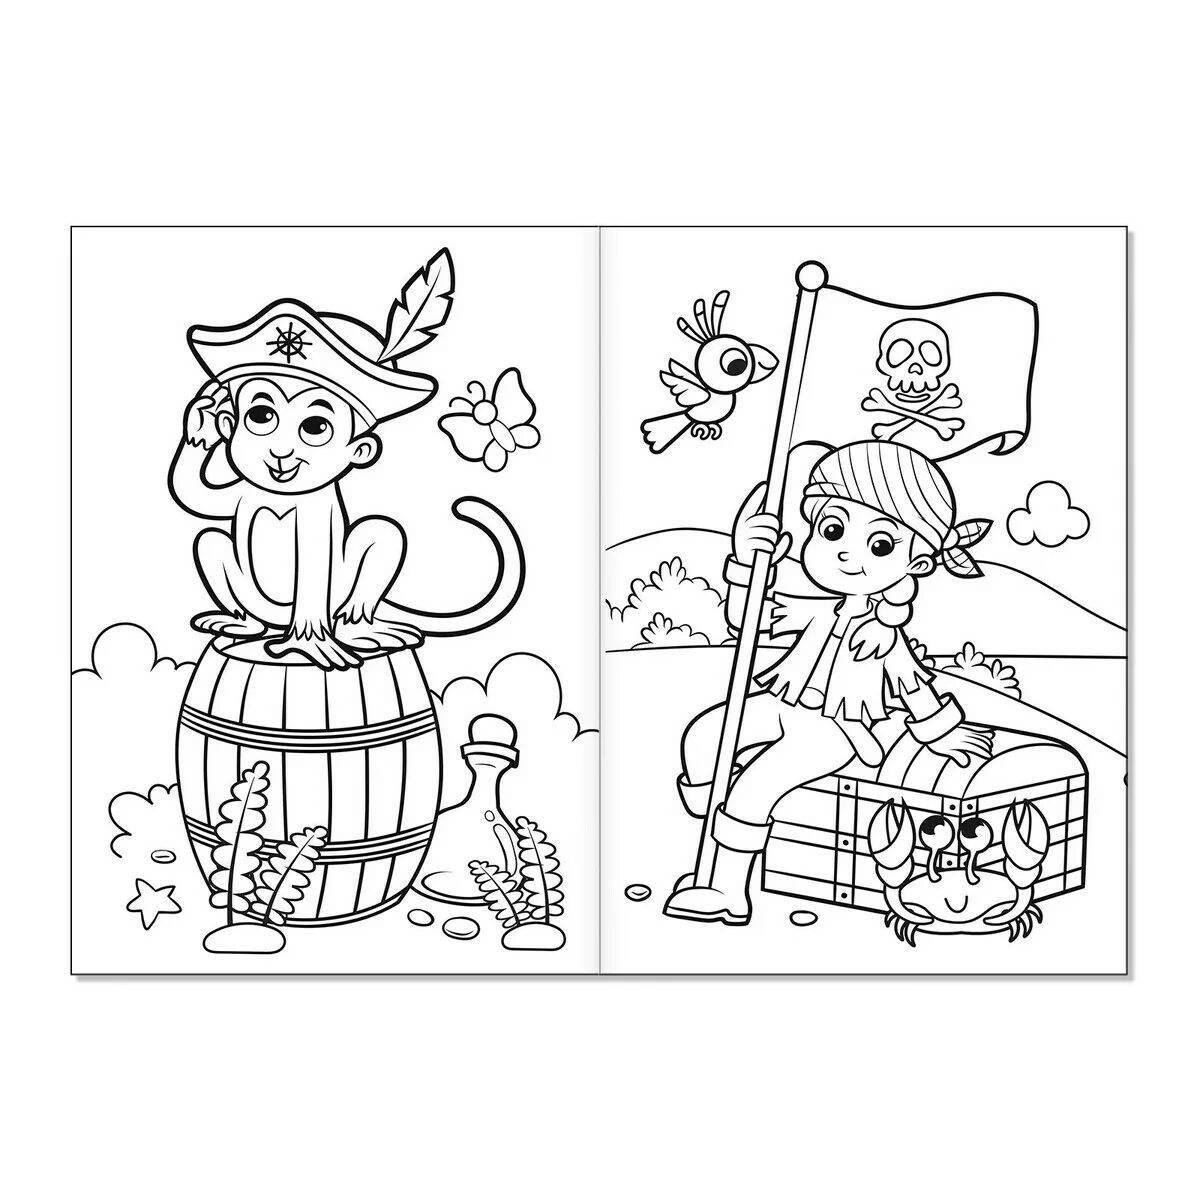 Harmonious coloring page 2 for girls